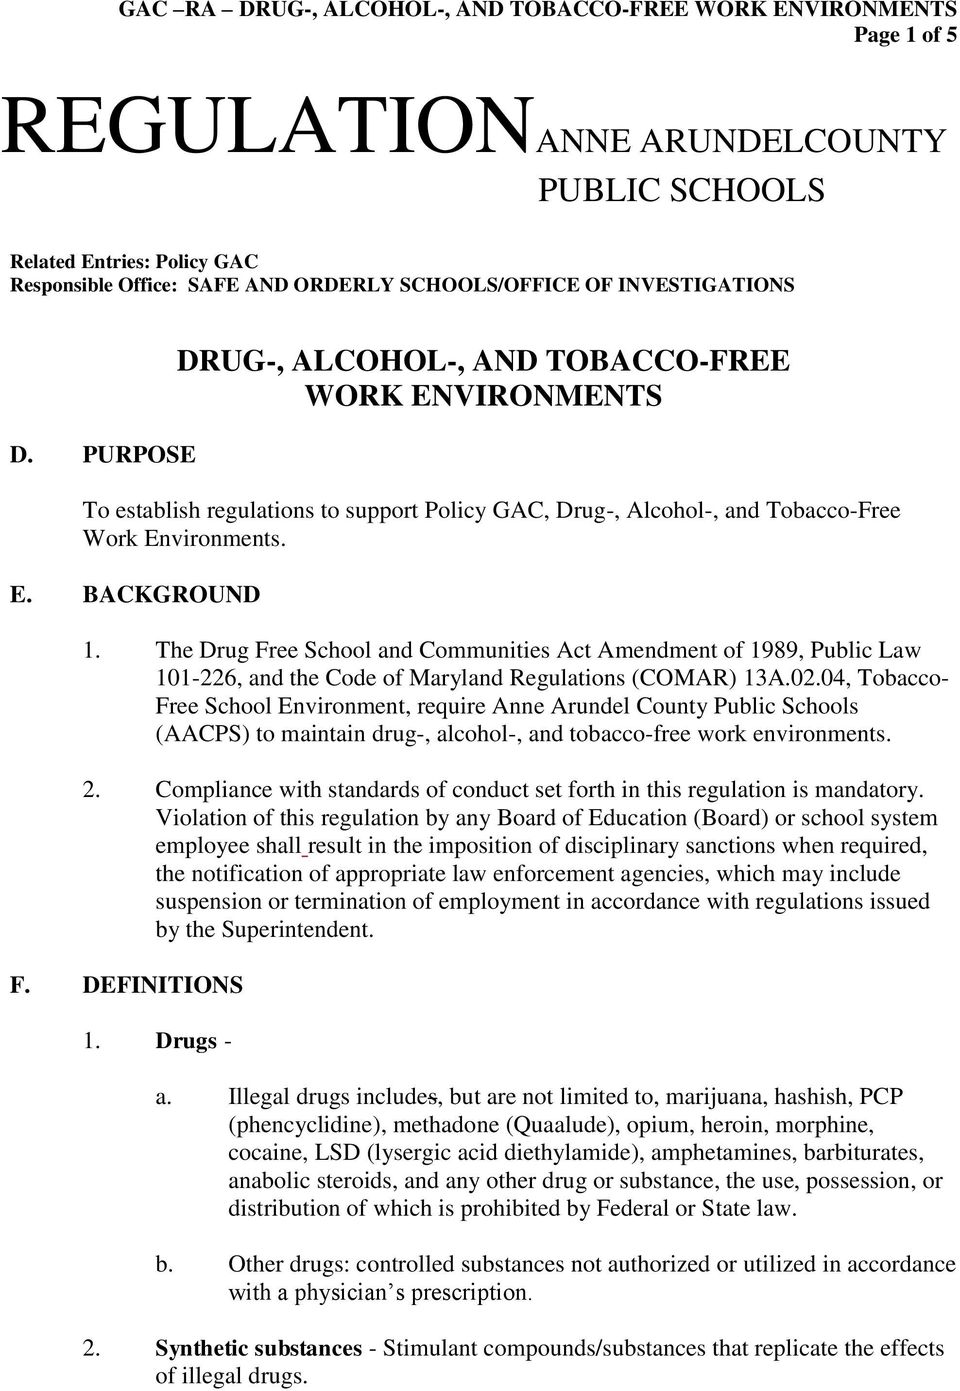 The Drug Free School and Communities Act Amendment of 1989, Public Law 101-226, and the Code of Maryland Regulations (COMAR) 13A.02.